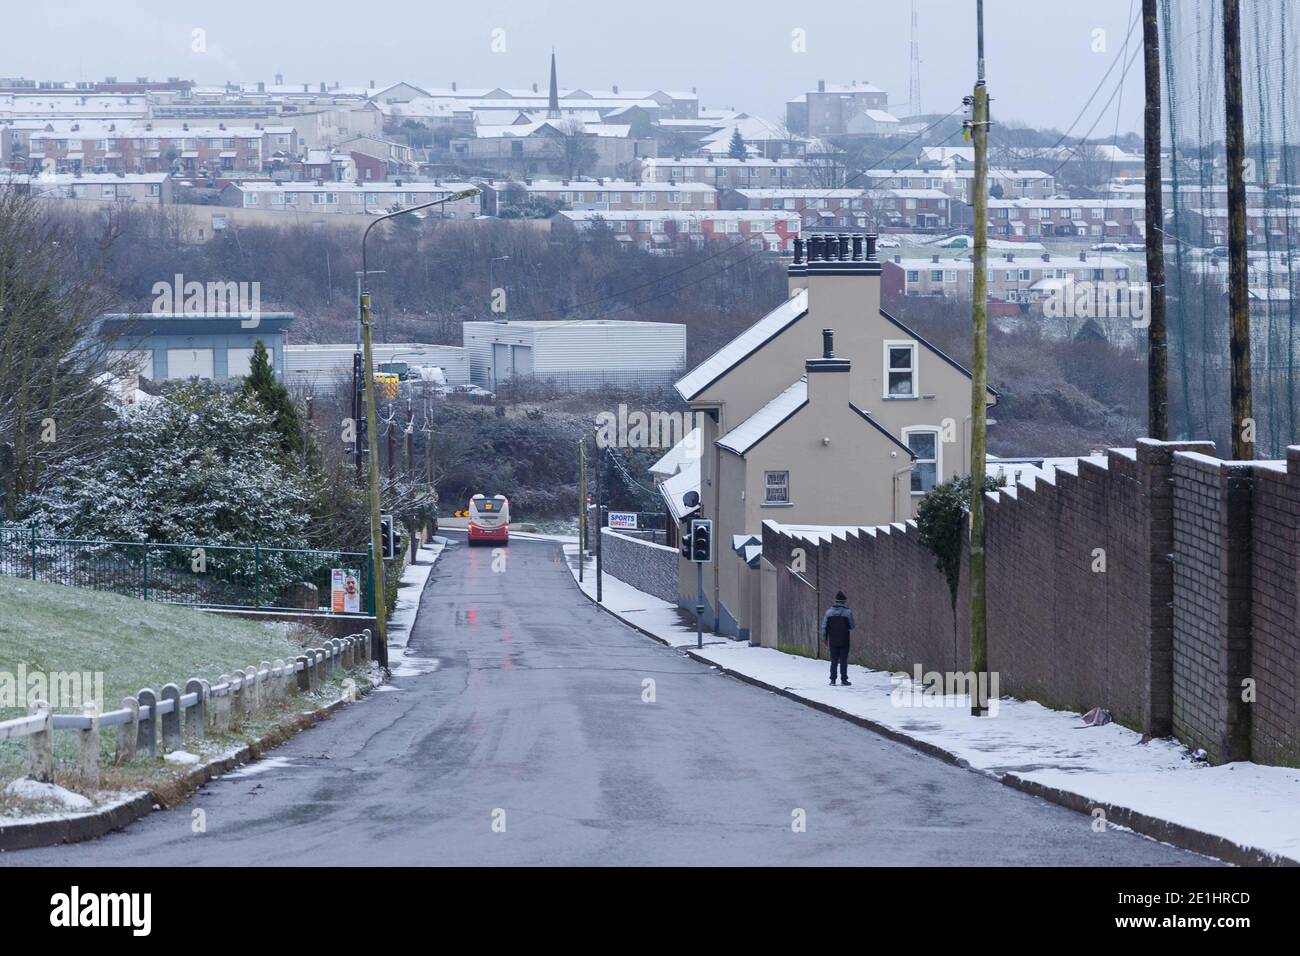 Cork, Ireland. 7th Jan, 2021. Snow Falls on Cork City. The 207 Bus making its way down Ballincollie Road folllowed by a pedestrian braving the paths. The people of Cork woke up this morning to the city and suburbs covered in a layer of snow following a short snow shower earlier this morning. Many wrapped up in coats and hats and went out to enjoy the crisp air and see the beautiful scenes. Credit: Damian Coleman/Alamy Live News Stock Photo